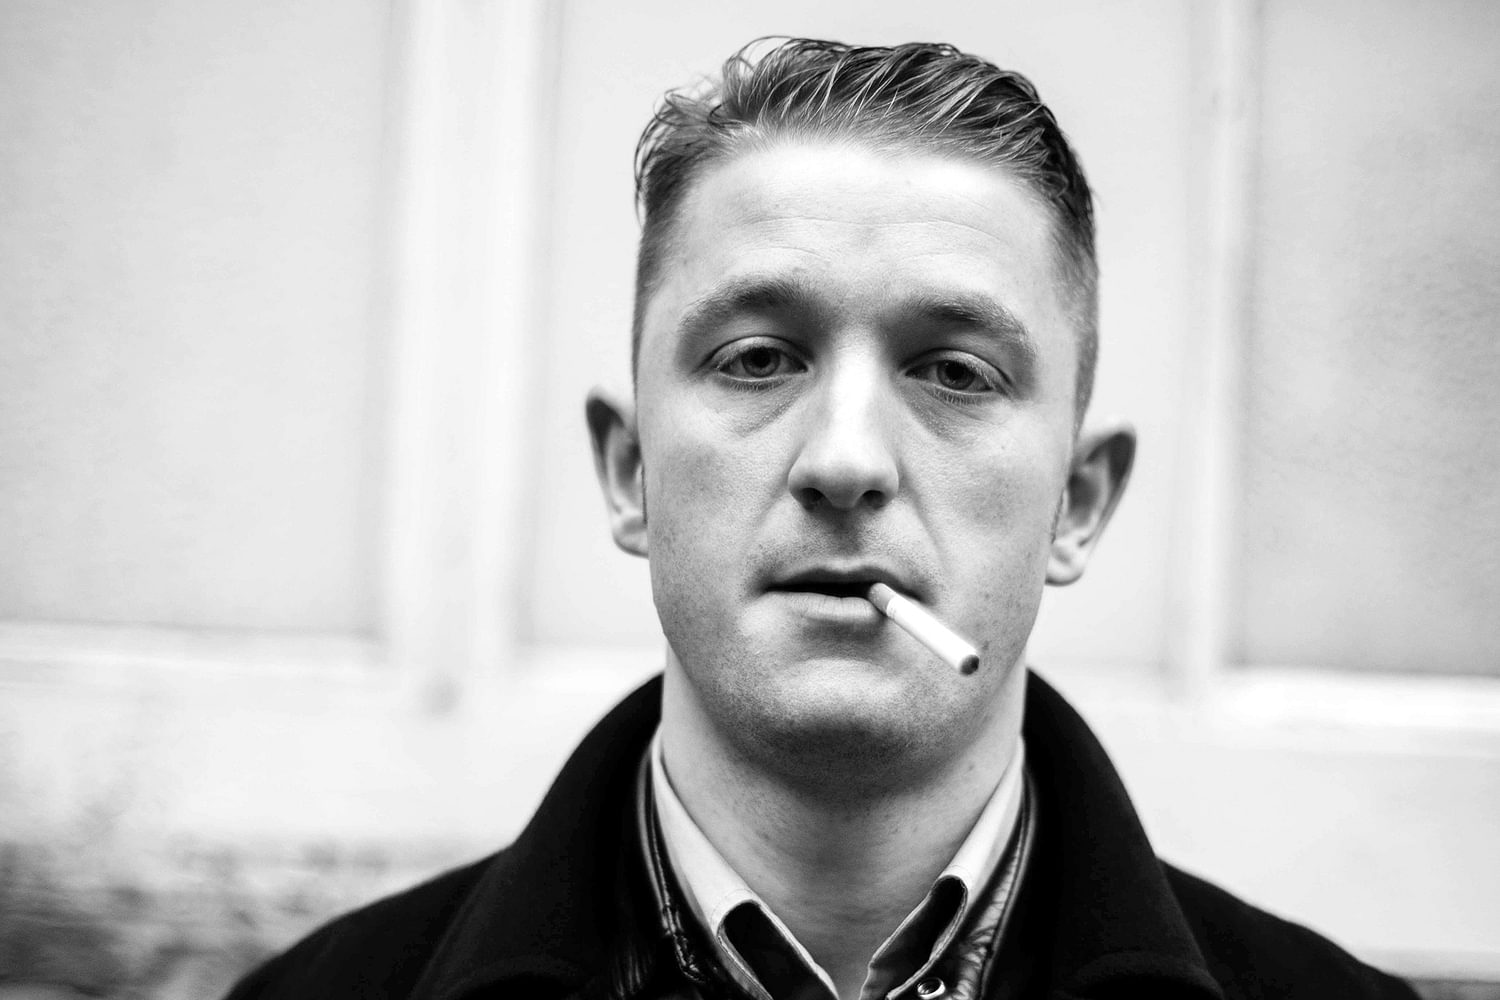 The Amazing Snakeheads announce new single, ‘Can’t Let You Go’